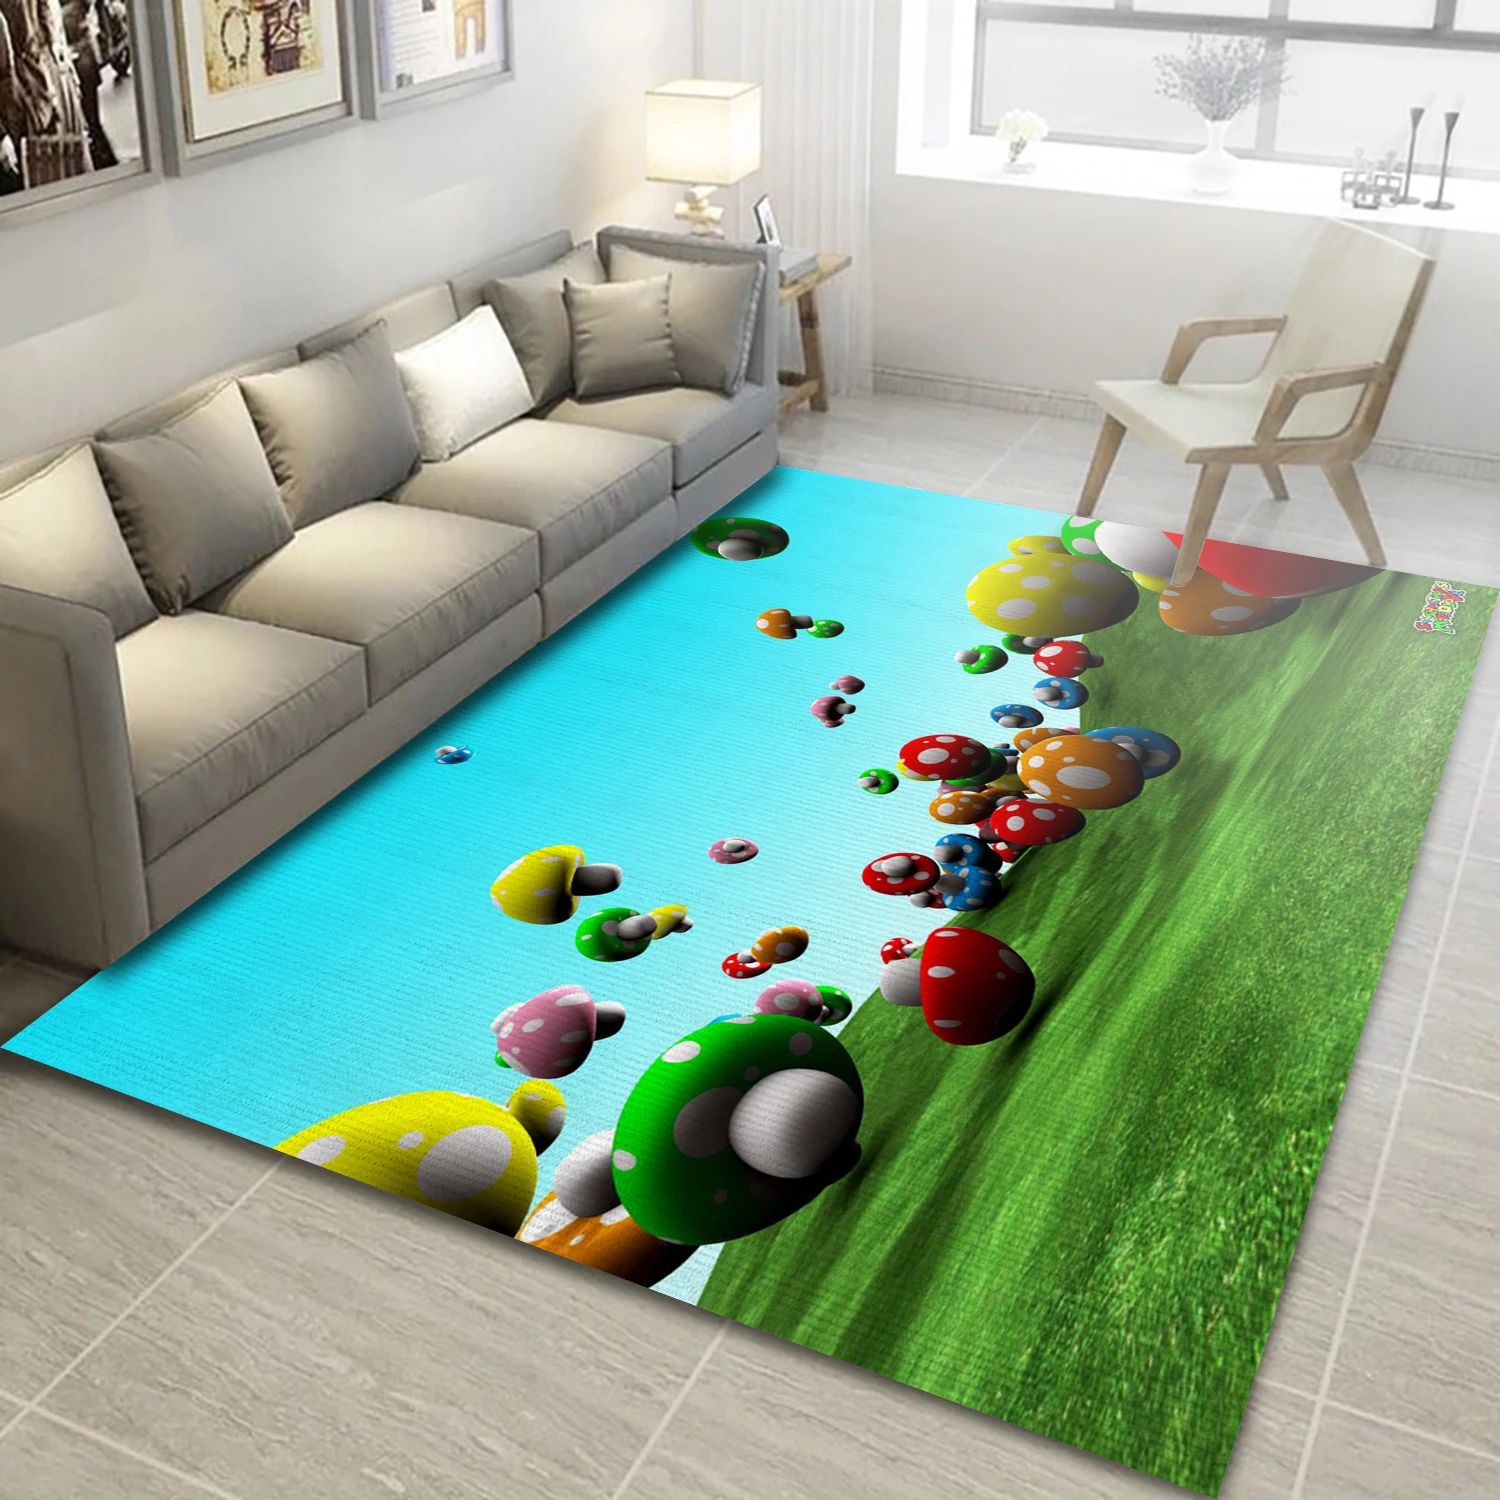 Mario Video Game Area Rug For Christmas, Bedroom Rug - Christmas Gift Decor - Indoor Outdoor Rugs 1